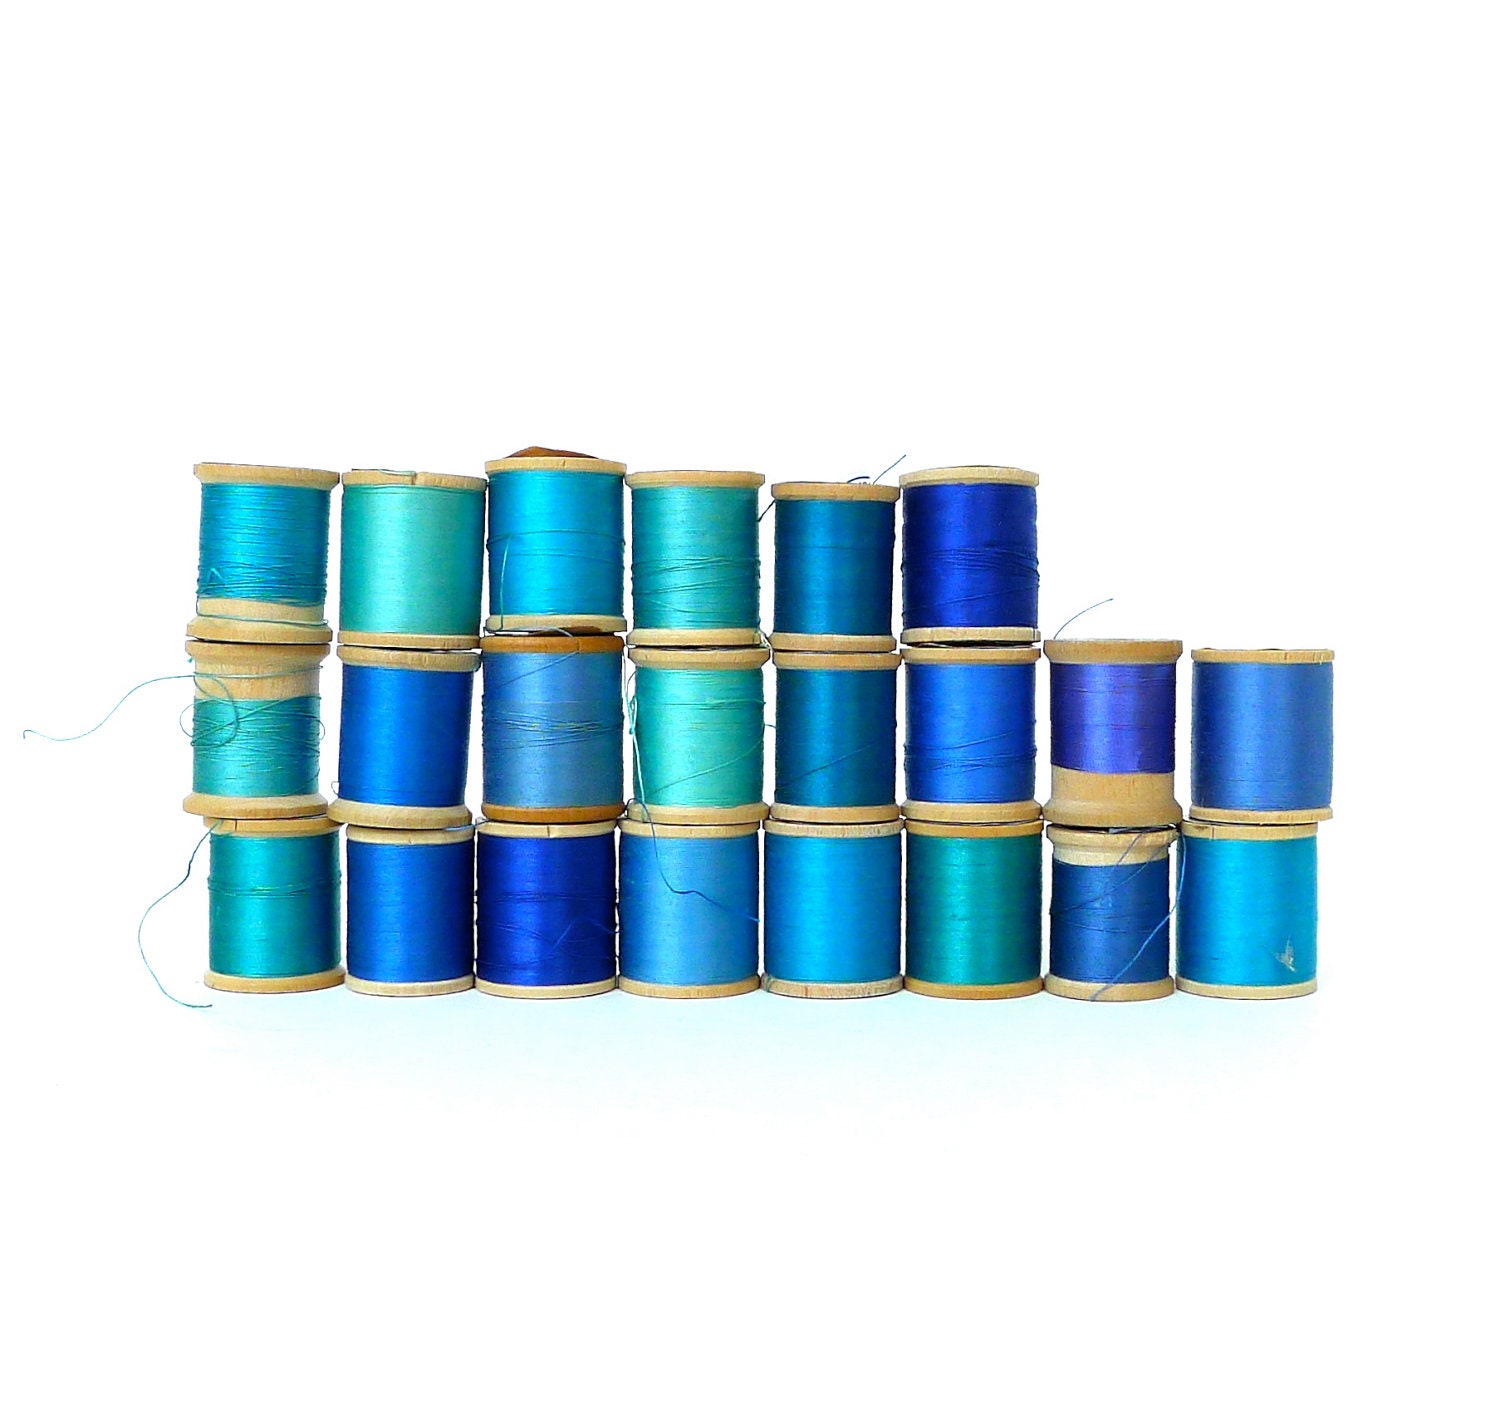 A Spool of Blue thread. Font Color Blue for Sewing Farm.